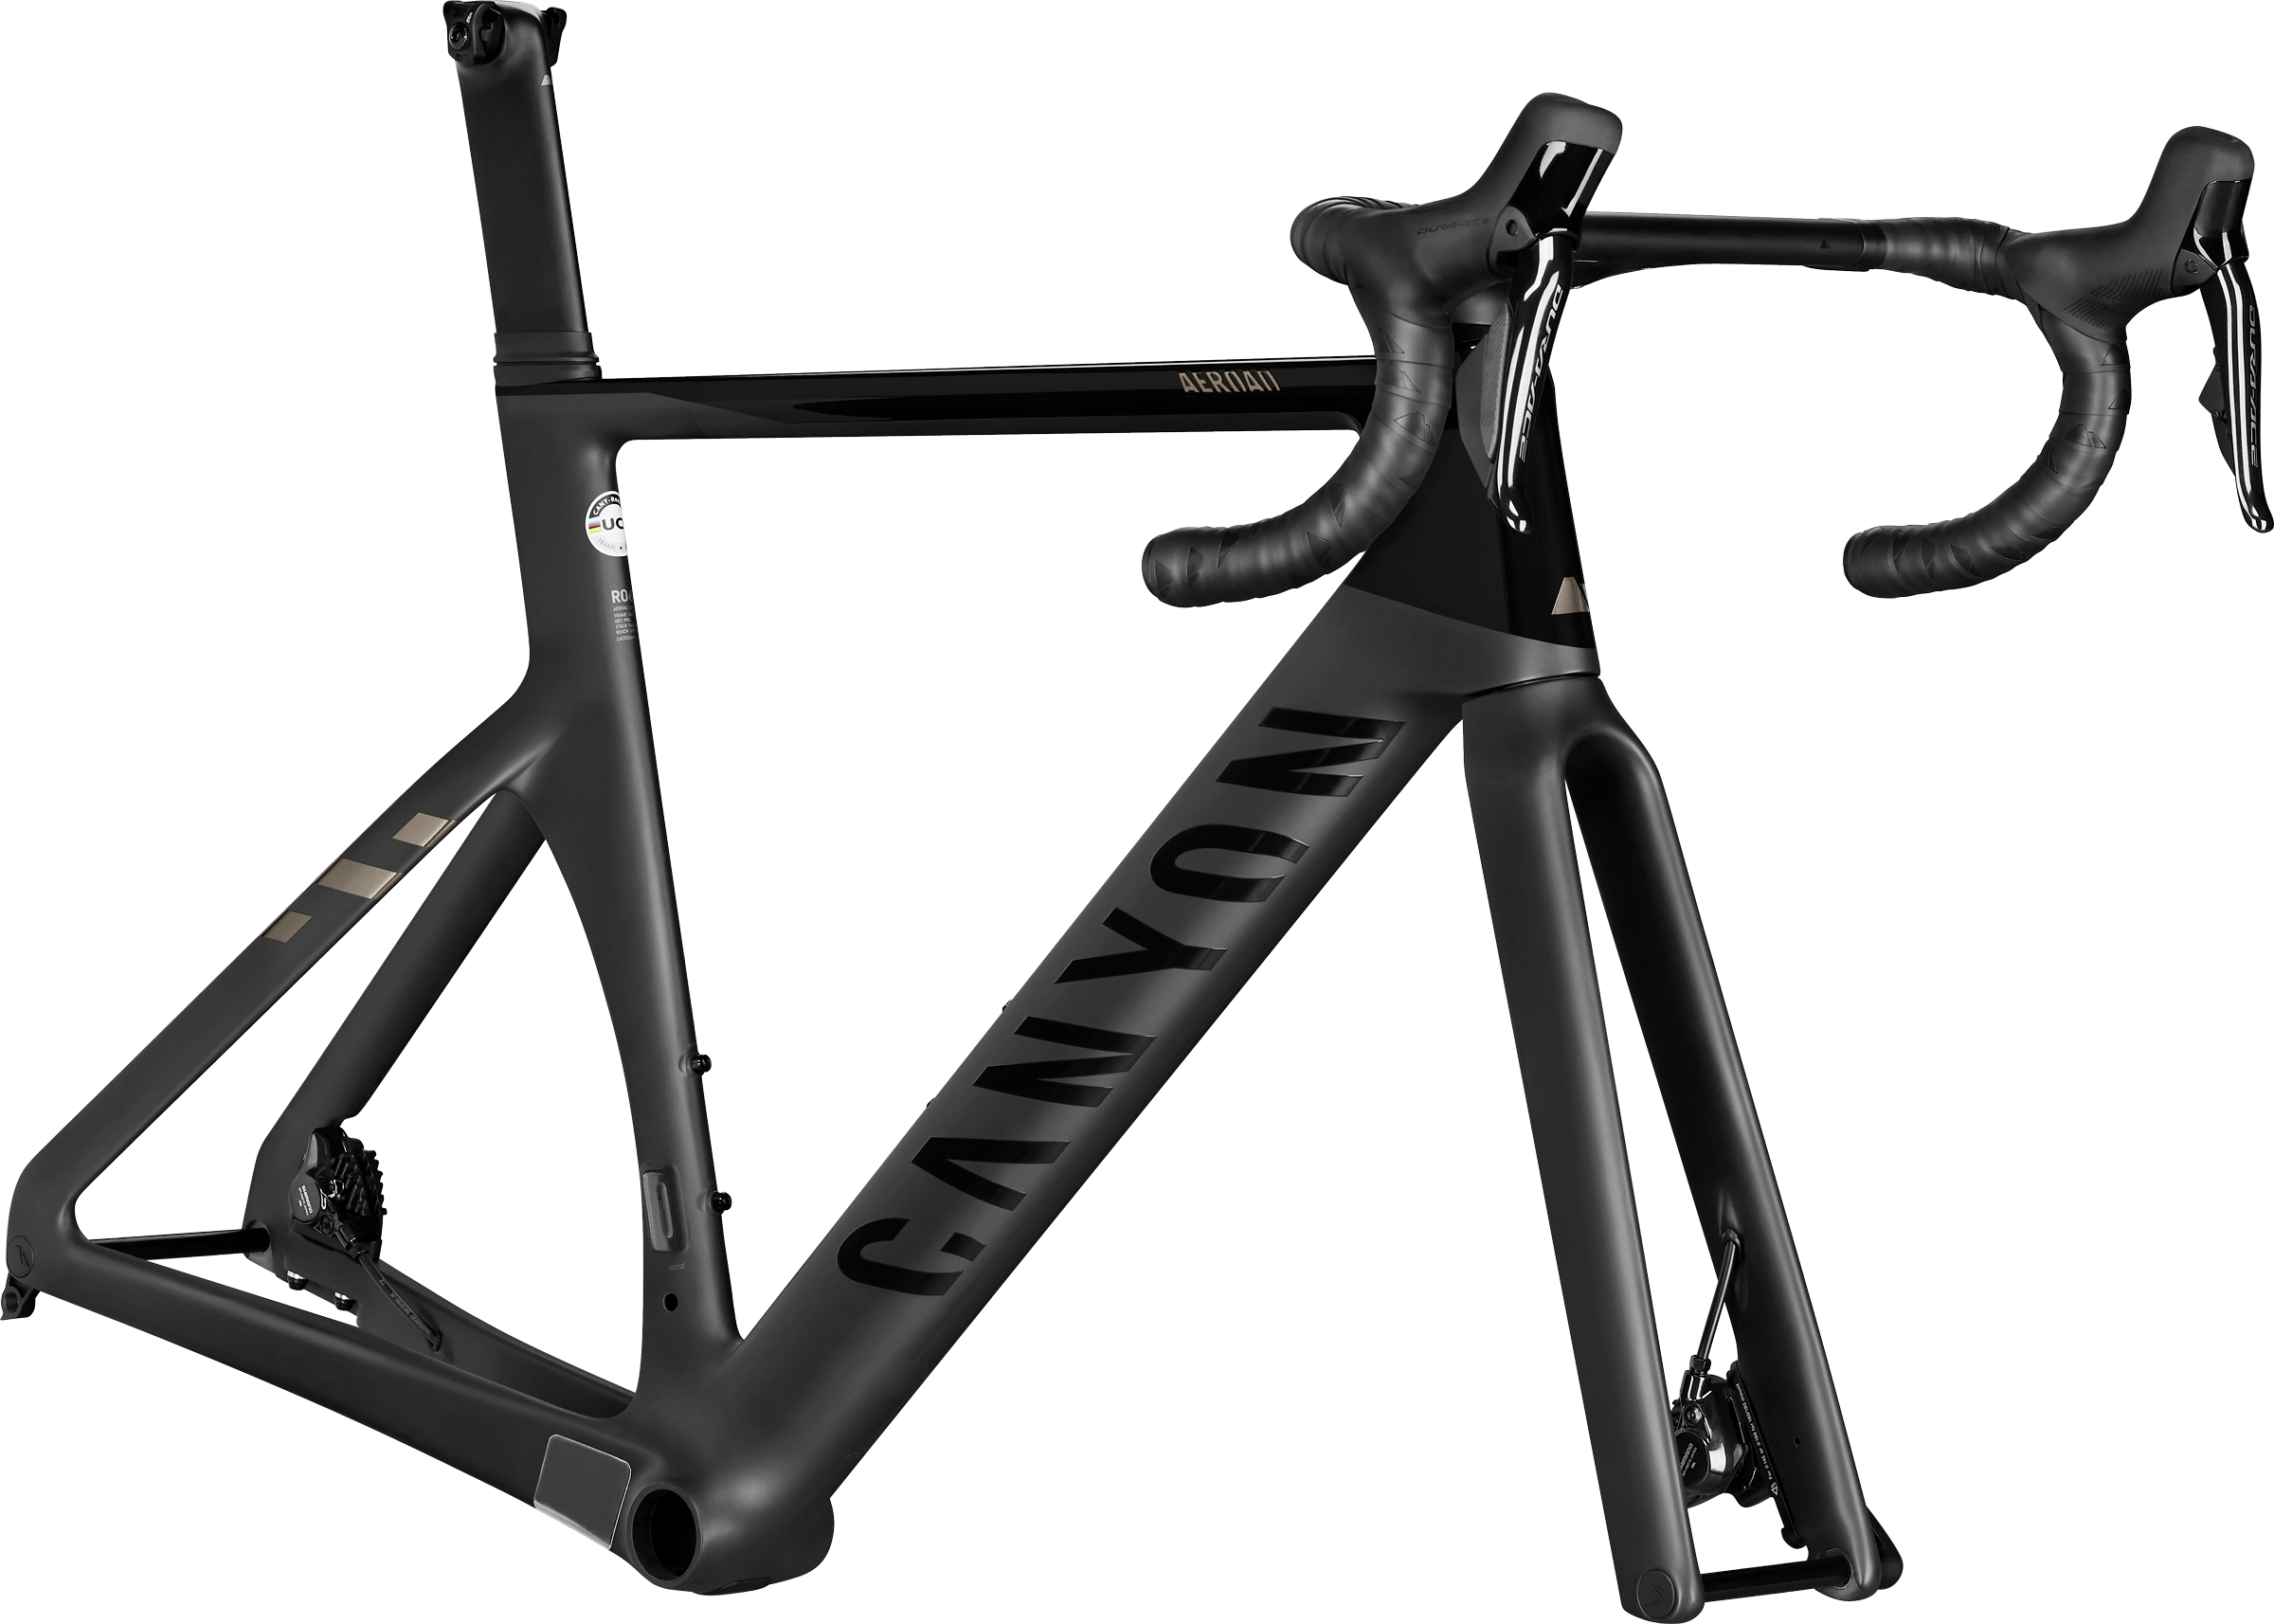 Aeroad CFR Disc Frame and Kit | BE